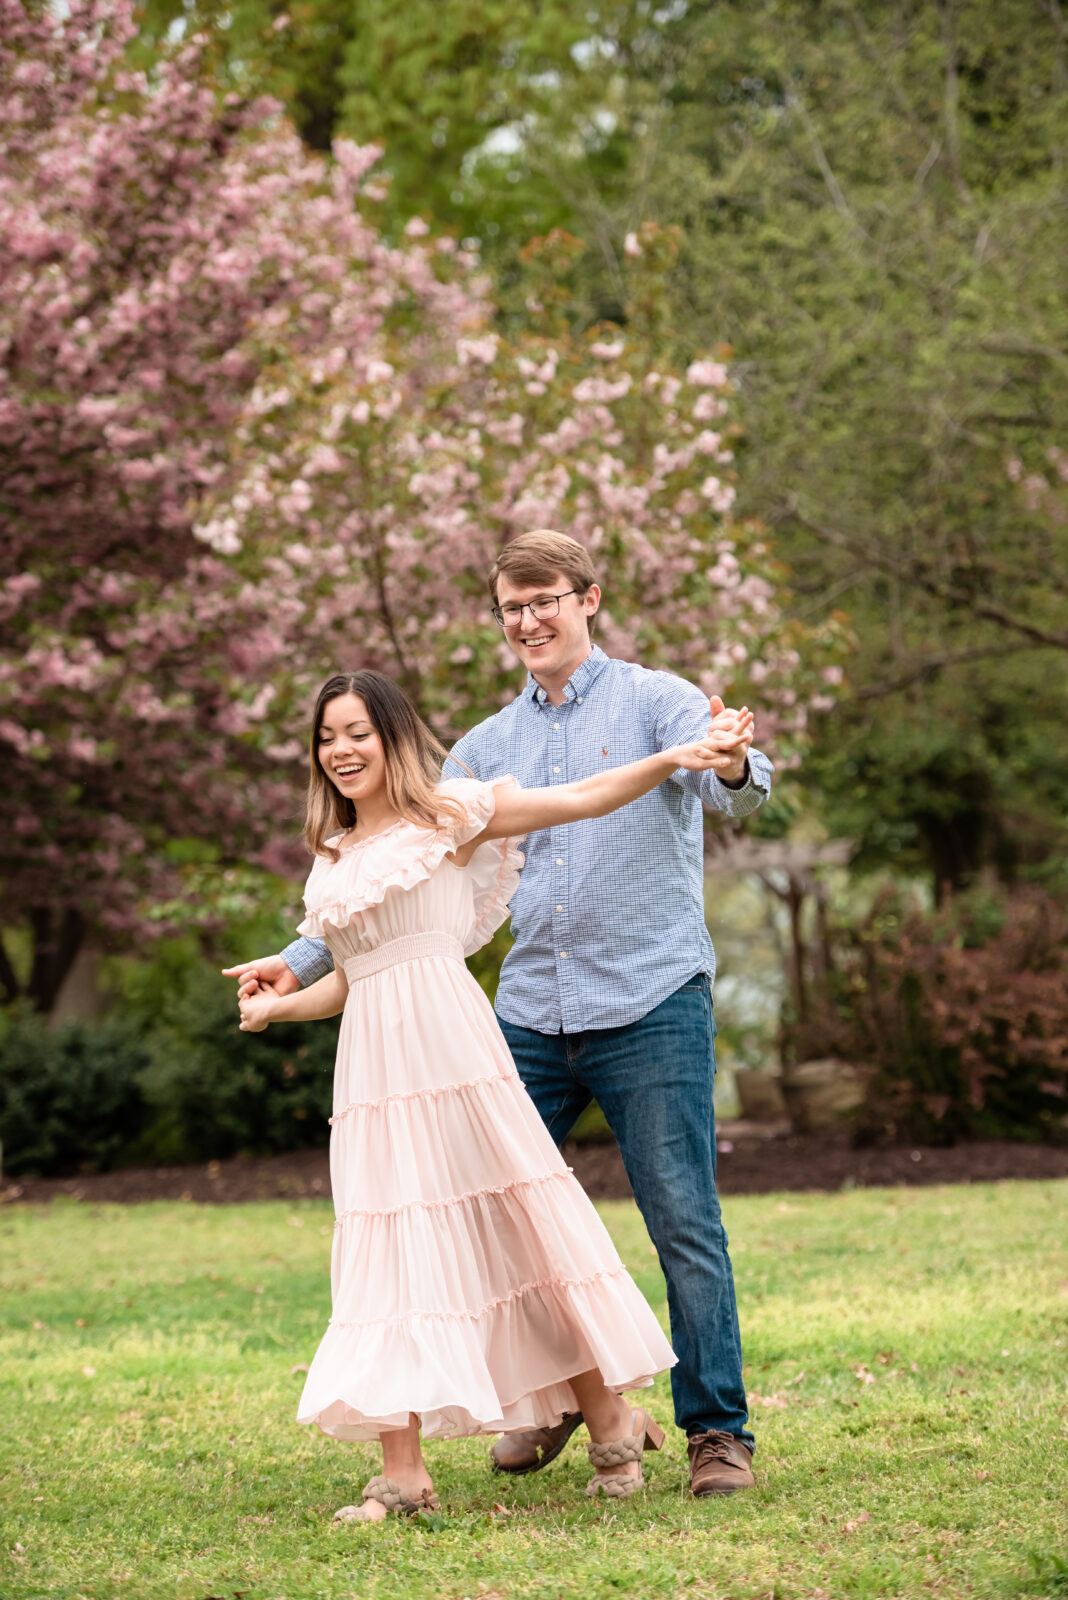 couple dancing and having fun around the flowers